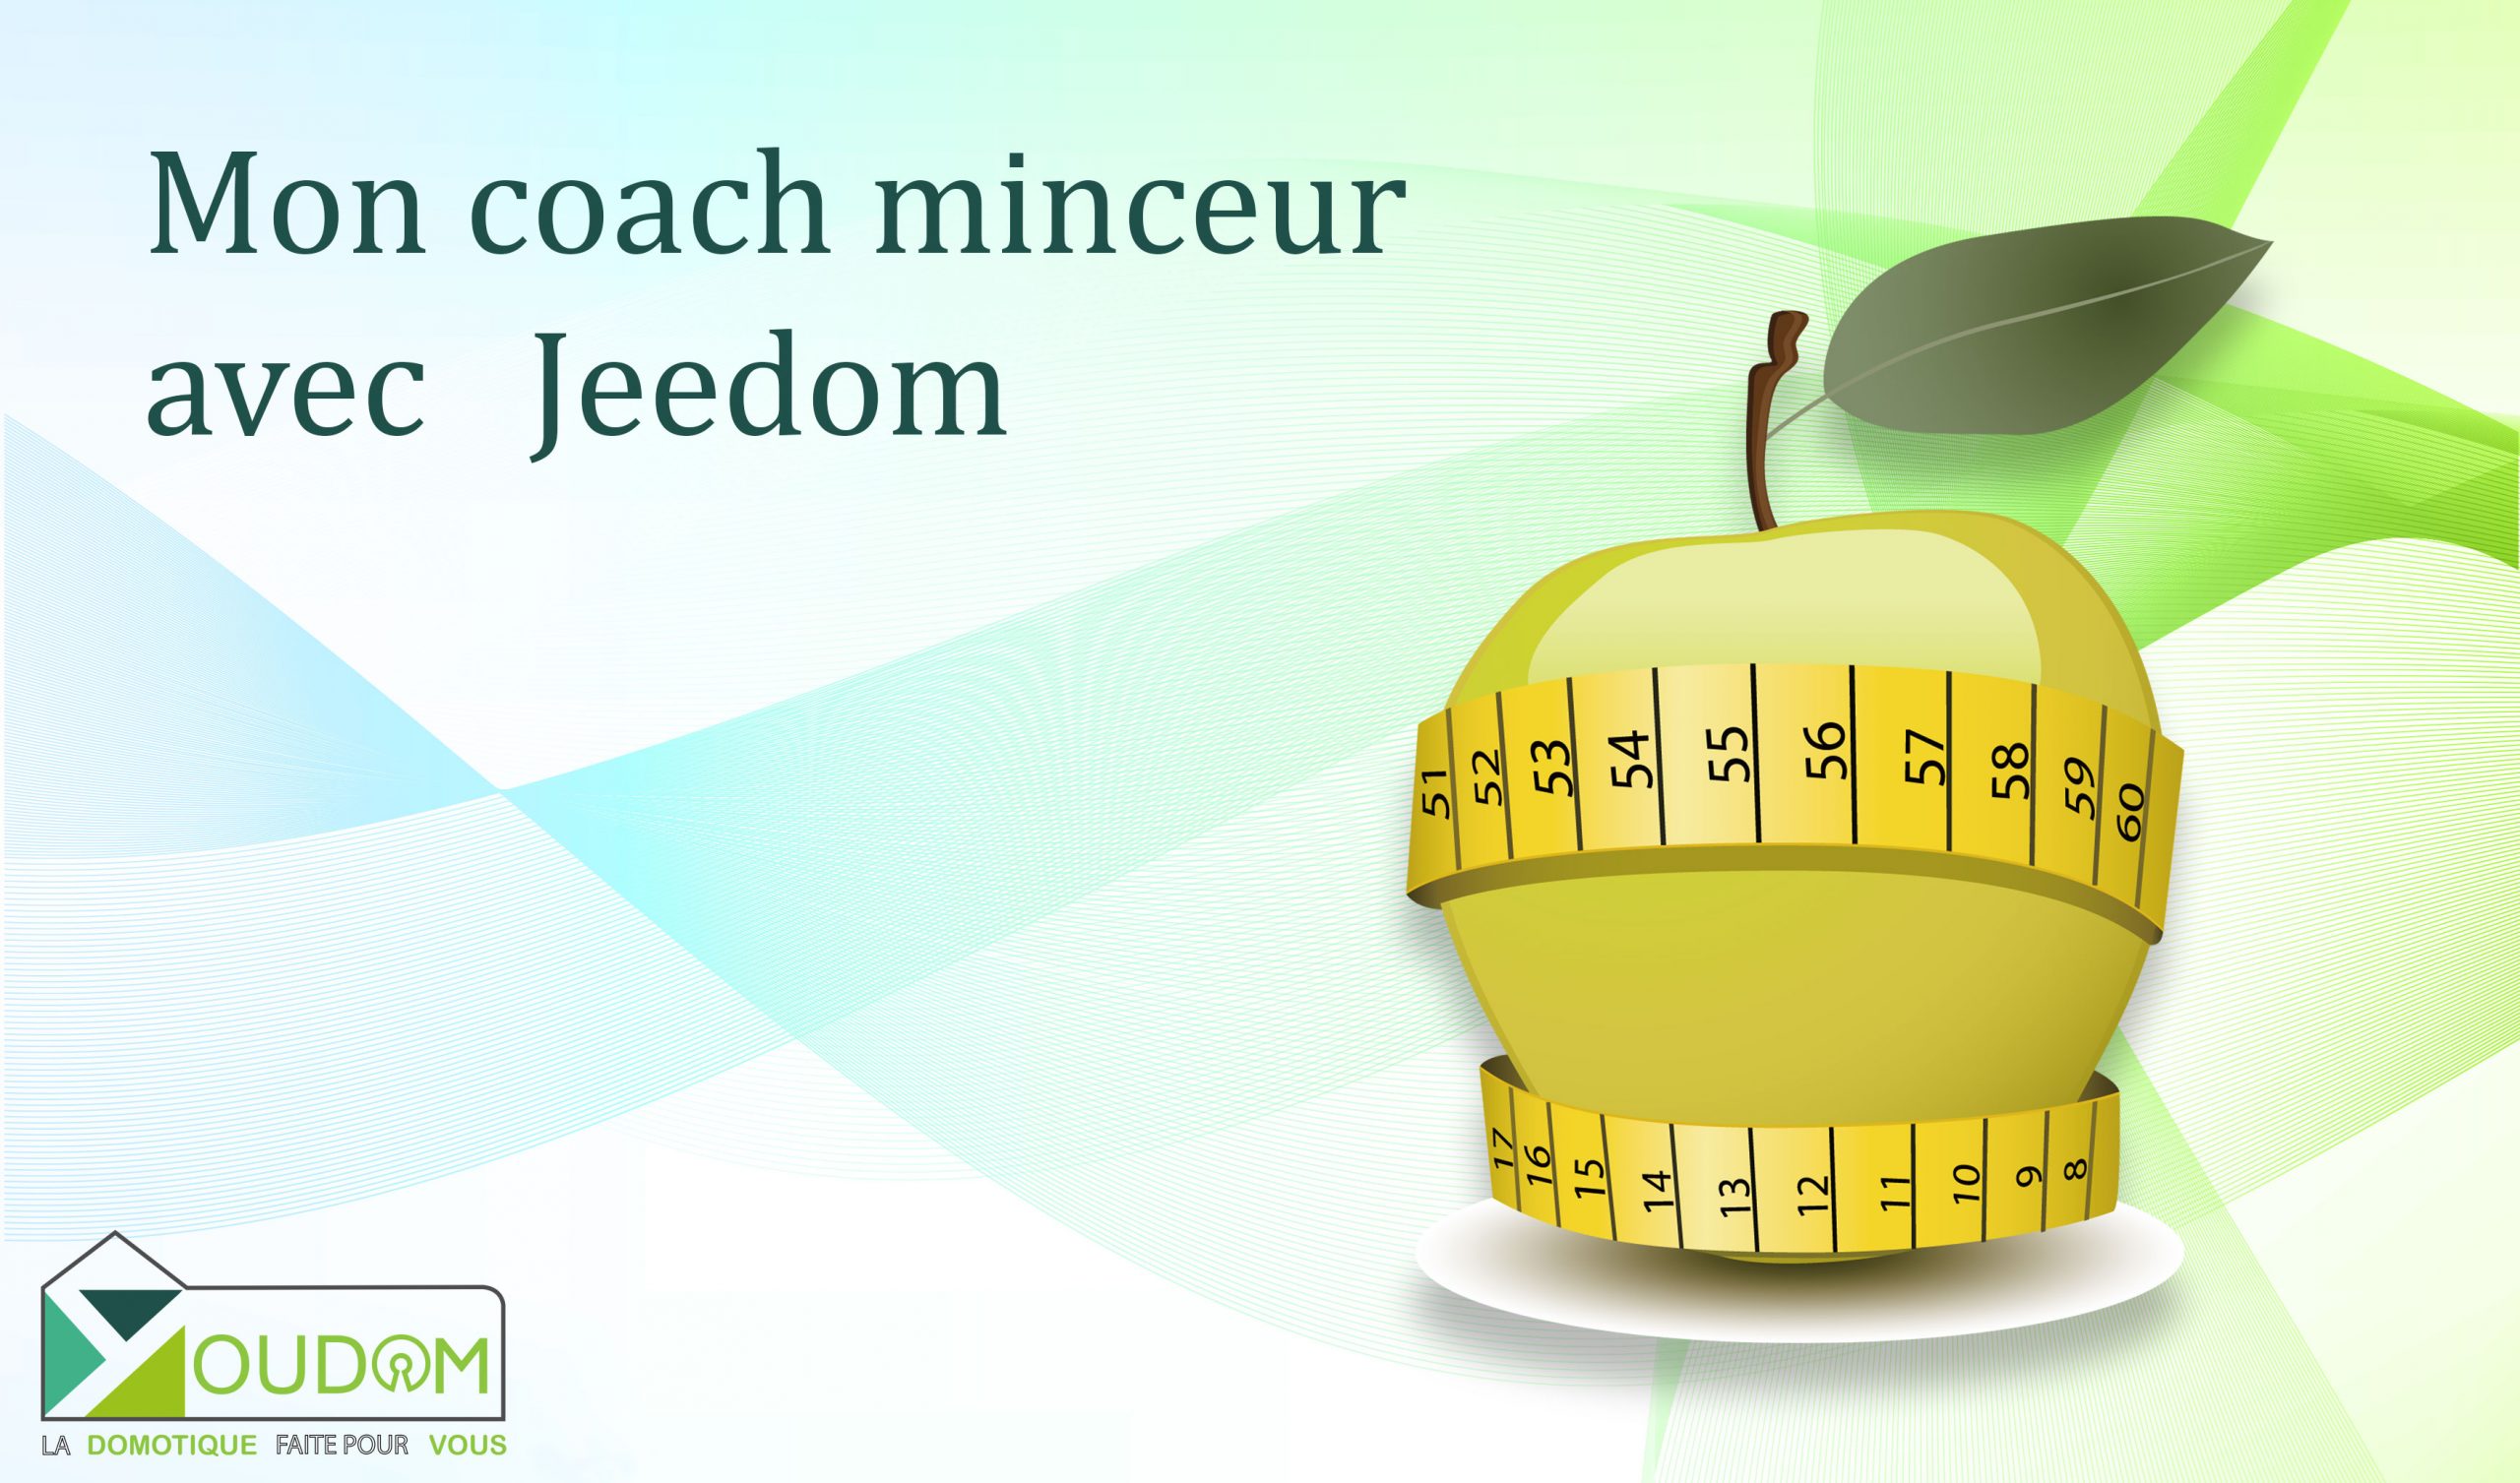 You are currently viewing Mon coach minceur avec Jeedom.